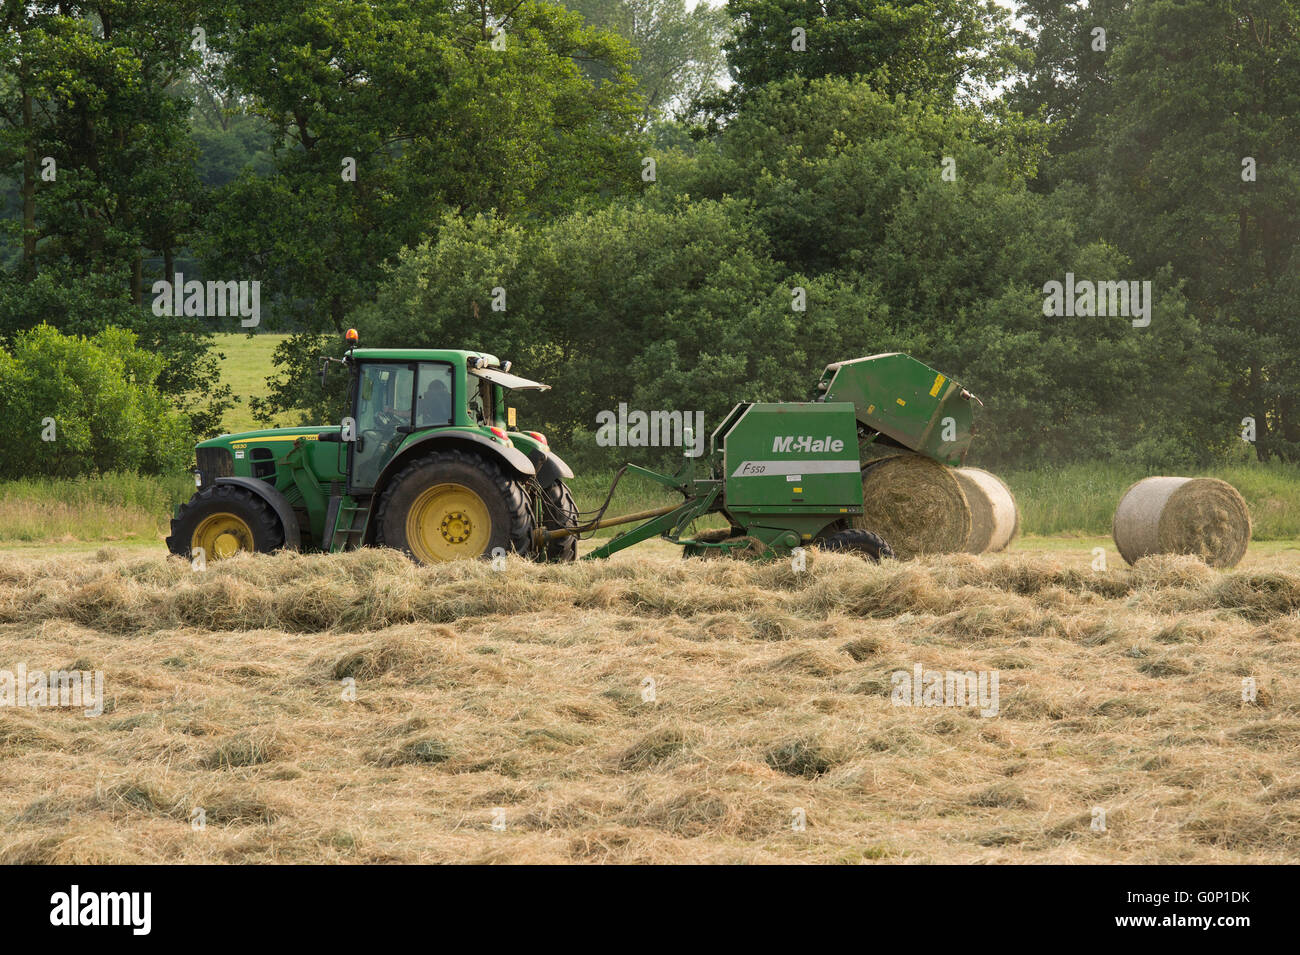 Great Ouseburn, North Yorkshire, GB, UK - round bale dropping & falling from a baler pulled by a green farm tractor working in a field, making silage. Stock Photo